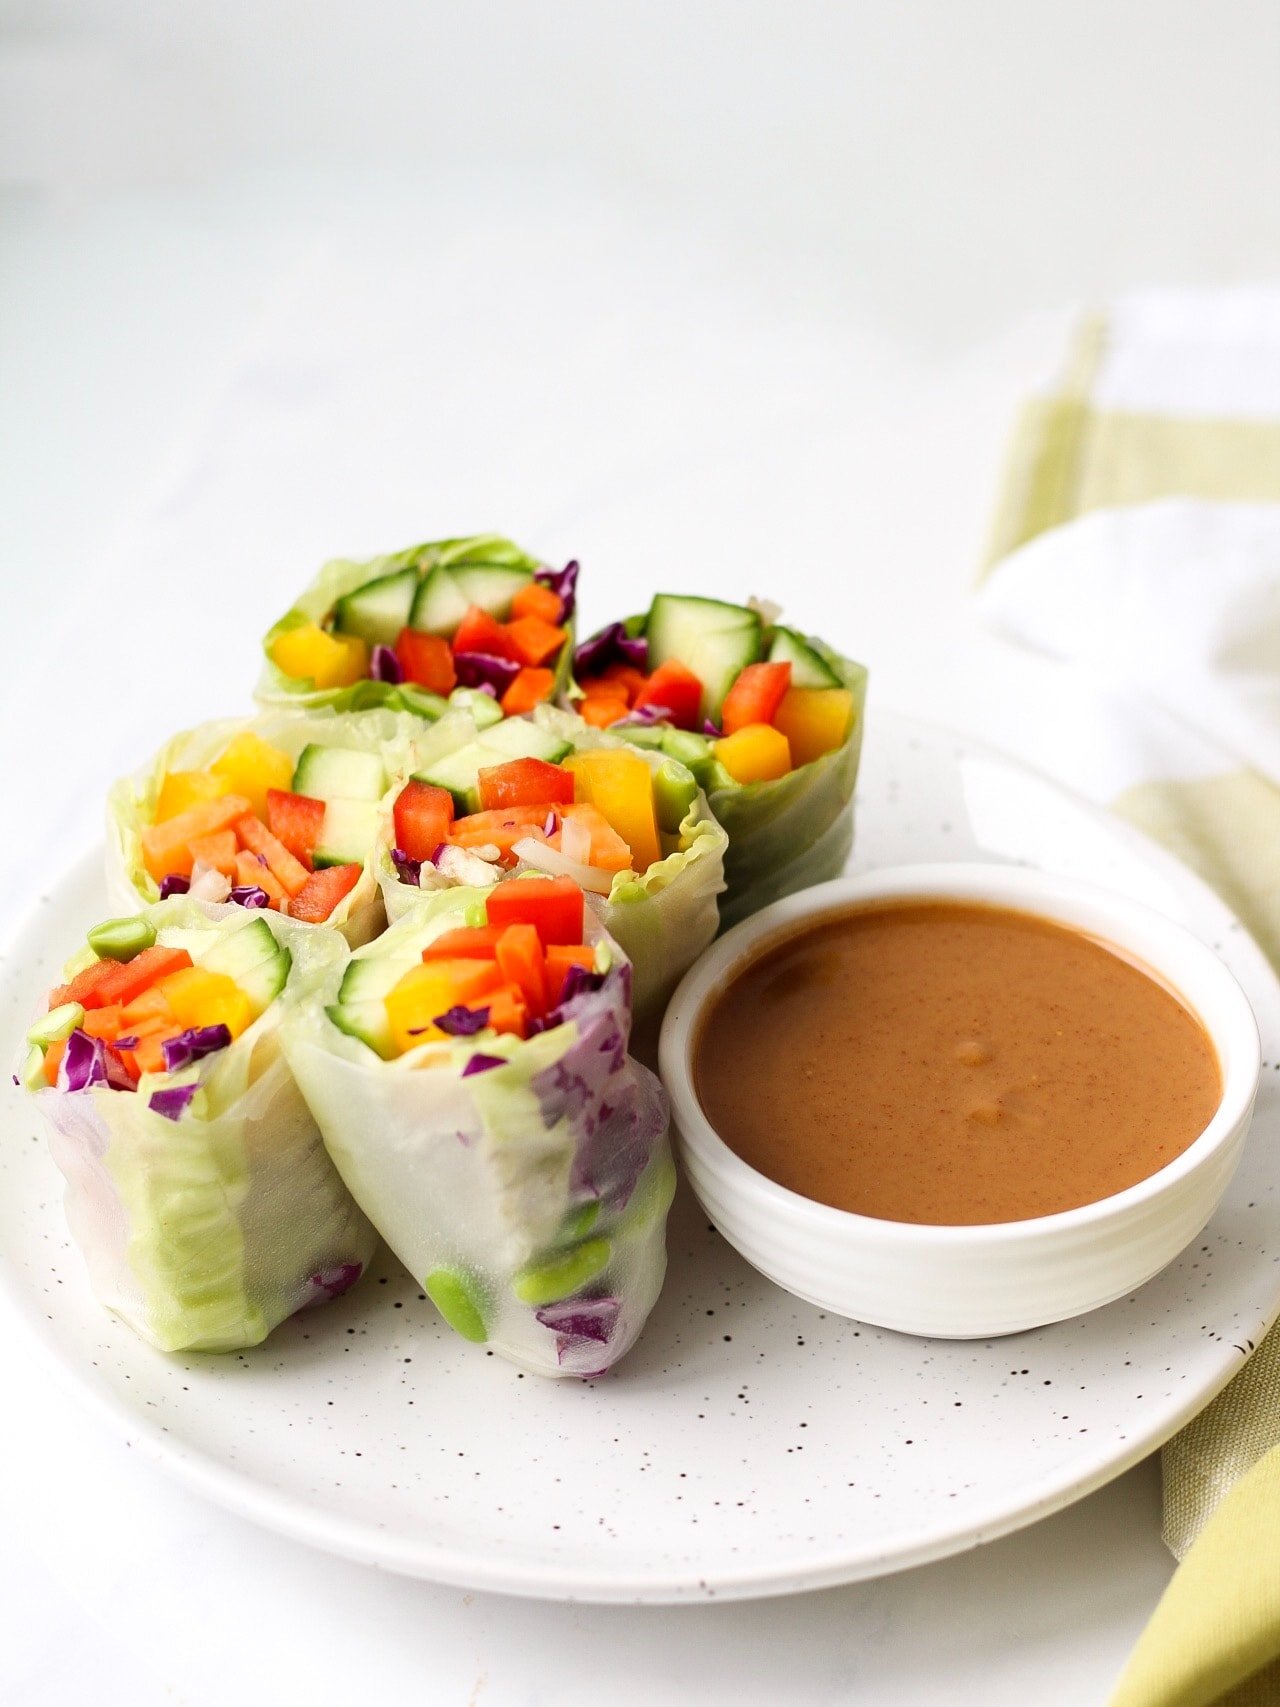 Fresh vegetable spring rolls on a white speckled plate beside a dish of peanut sauce